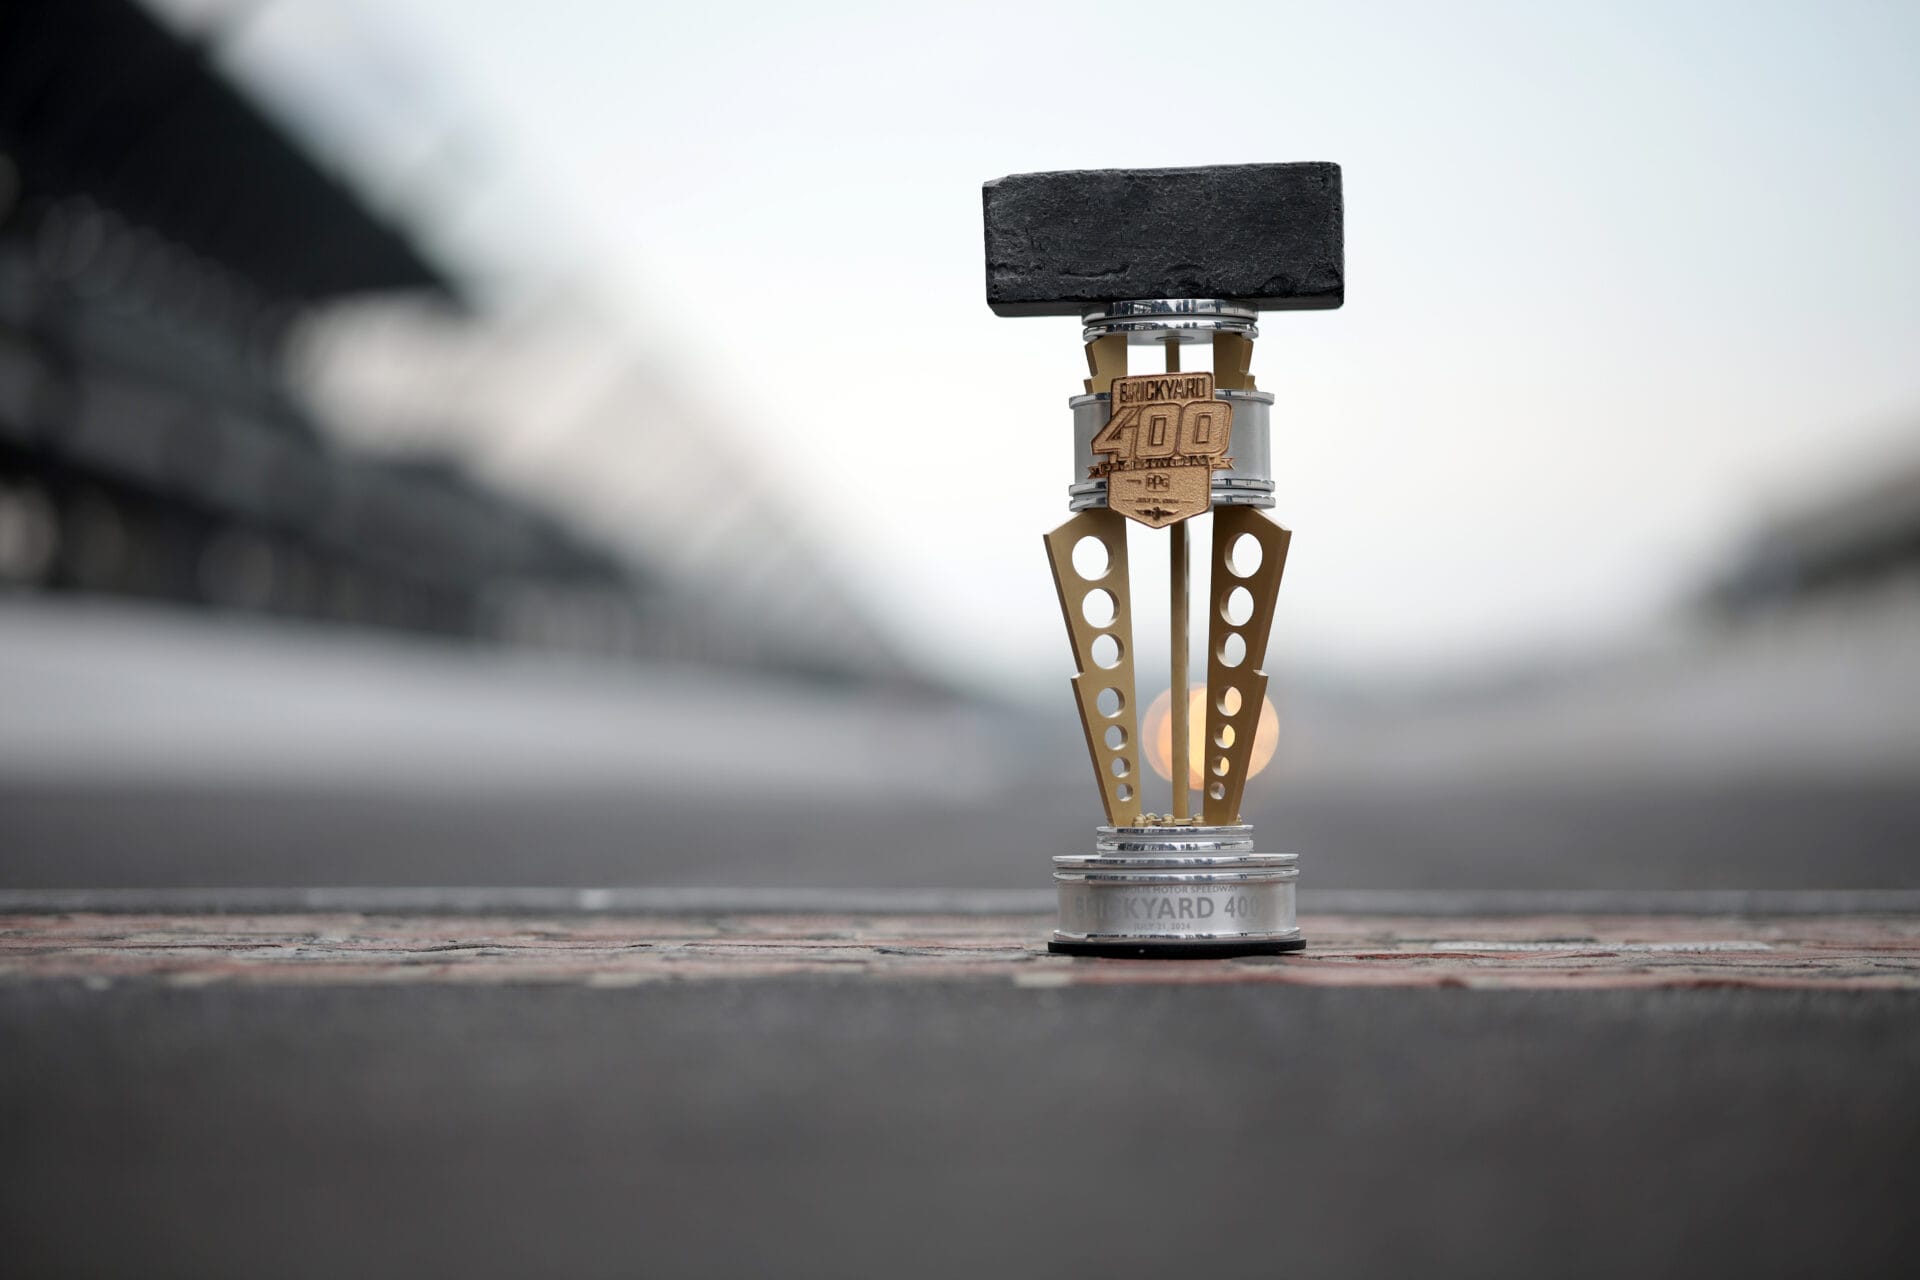 A general view of the Brickyard 400 trophy at the yard of brick after the NASCAR Cup Series Brickyard 400 at Indianapolis Motor Speedway on July 21, 2024 in Indianapolis, Indiana. (Photo by James Gilbert/Getty Images)